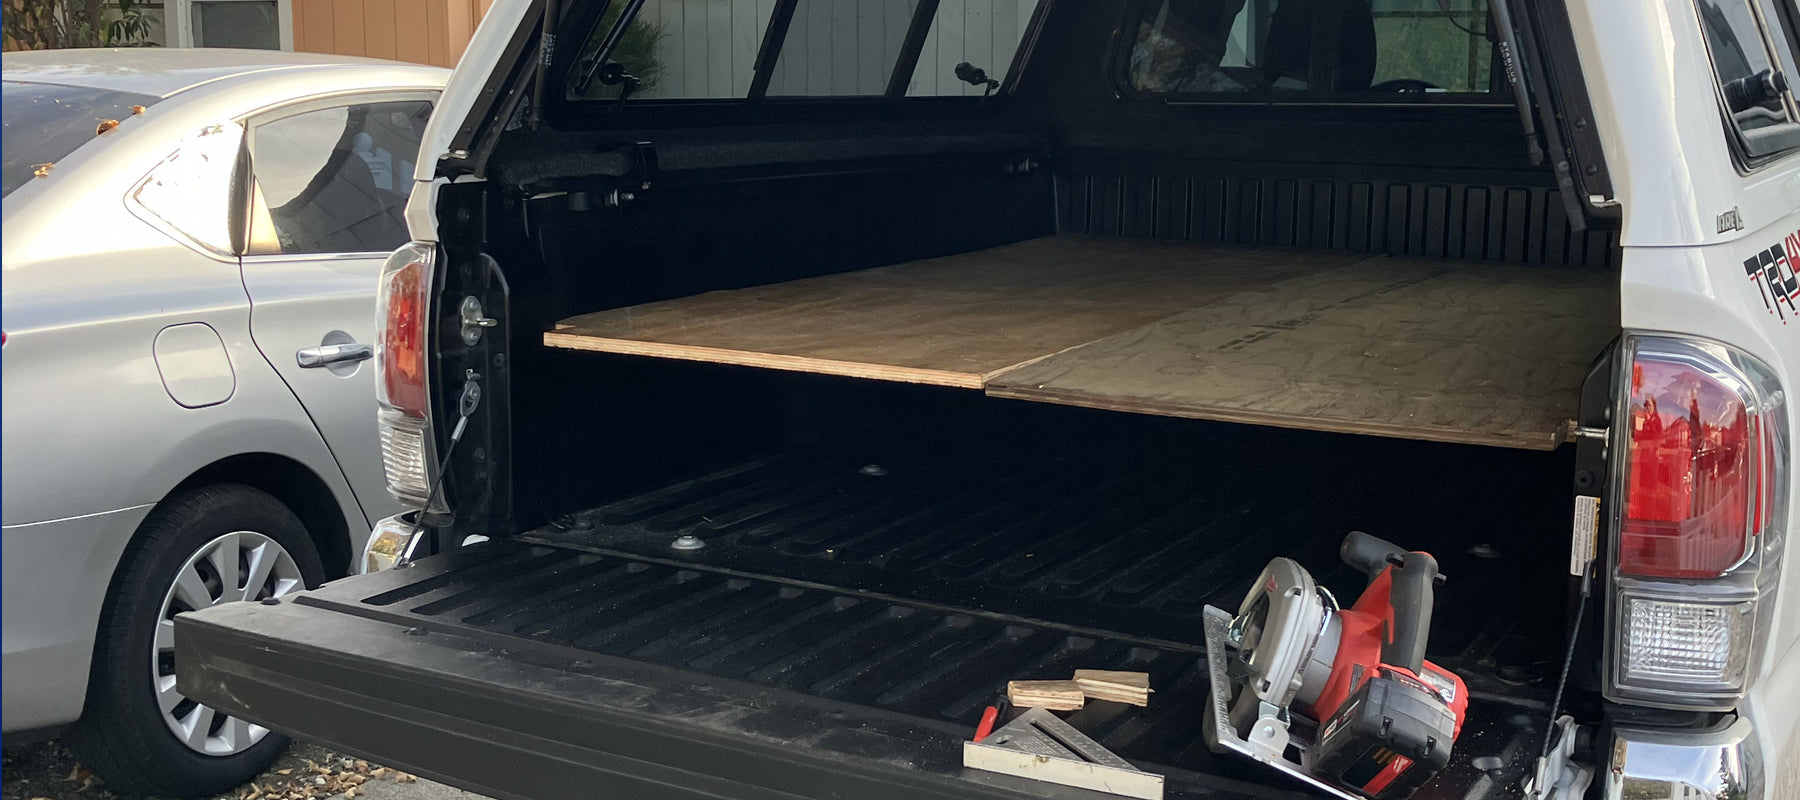 How To: DIY Build a Simple Platform for your Truck